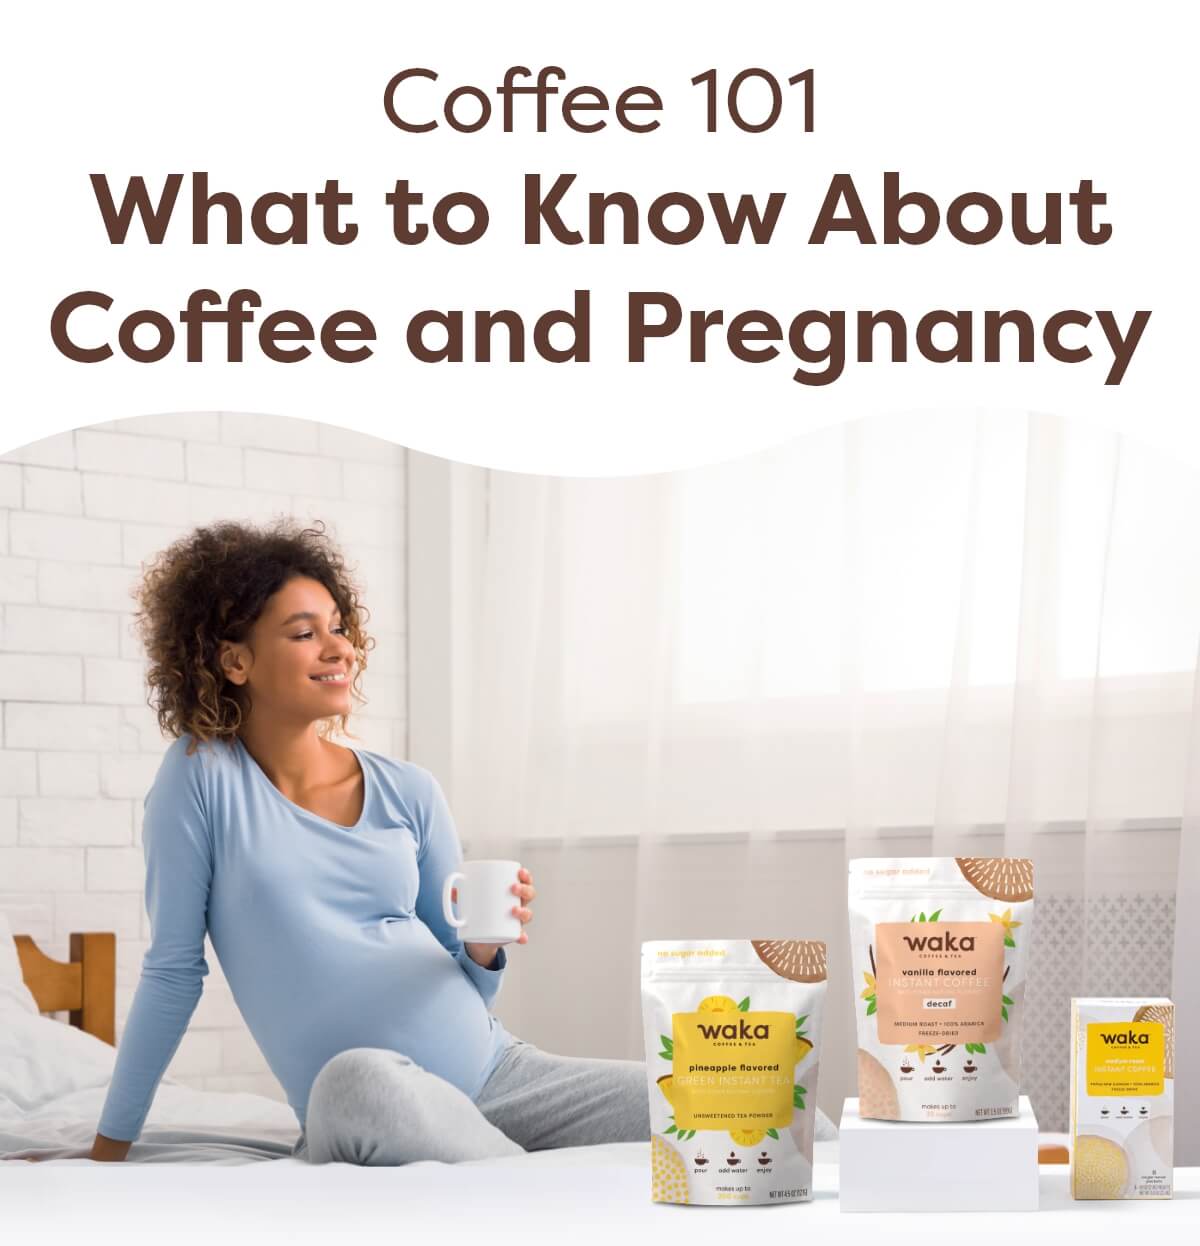 Coffee 101 | What to Know About Coffee and Pregnancy